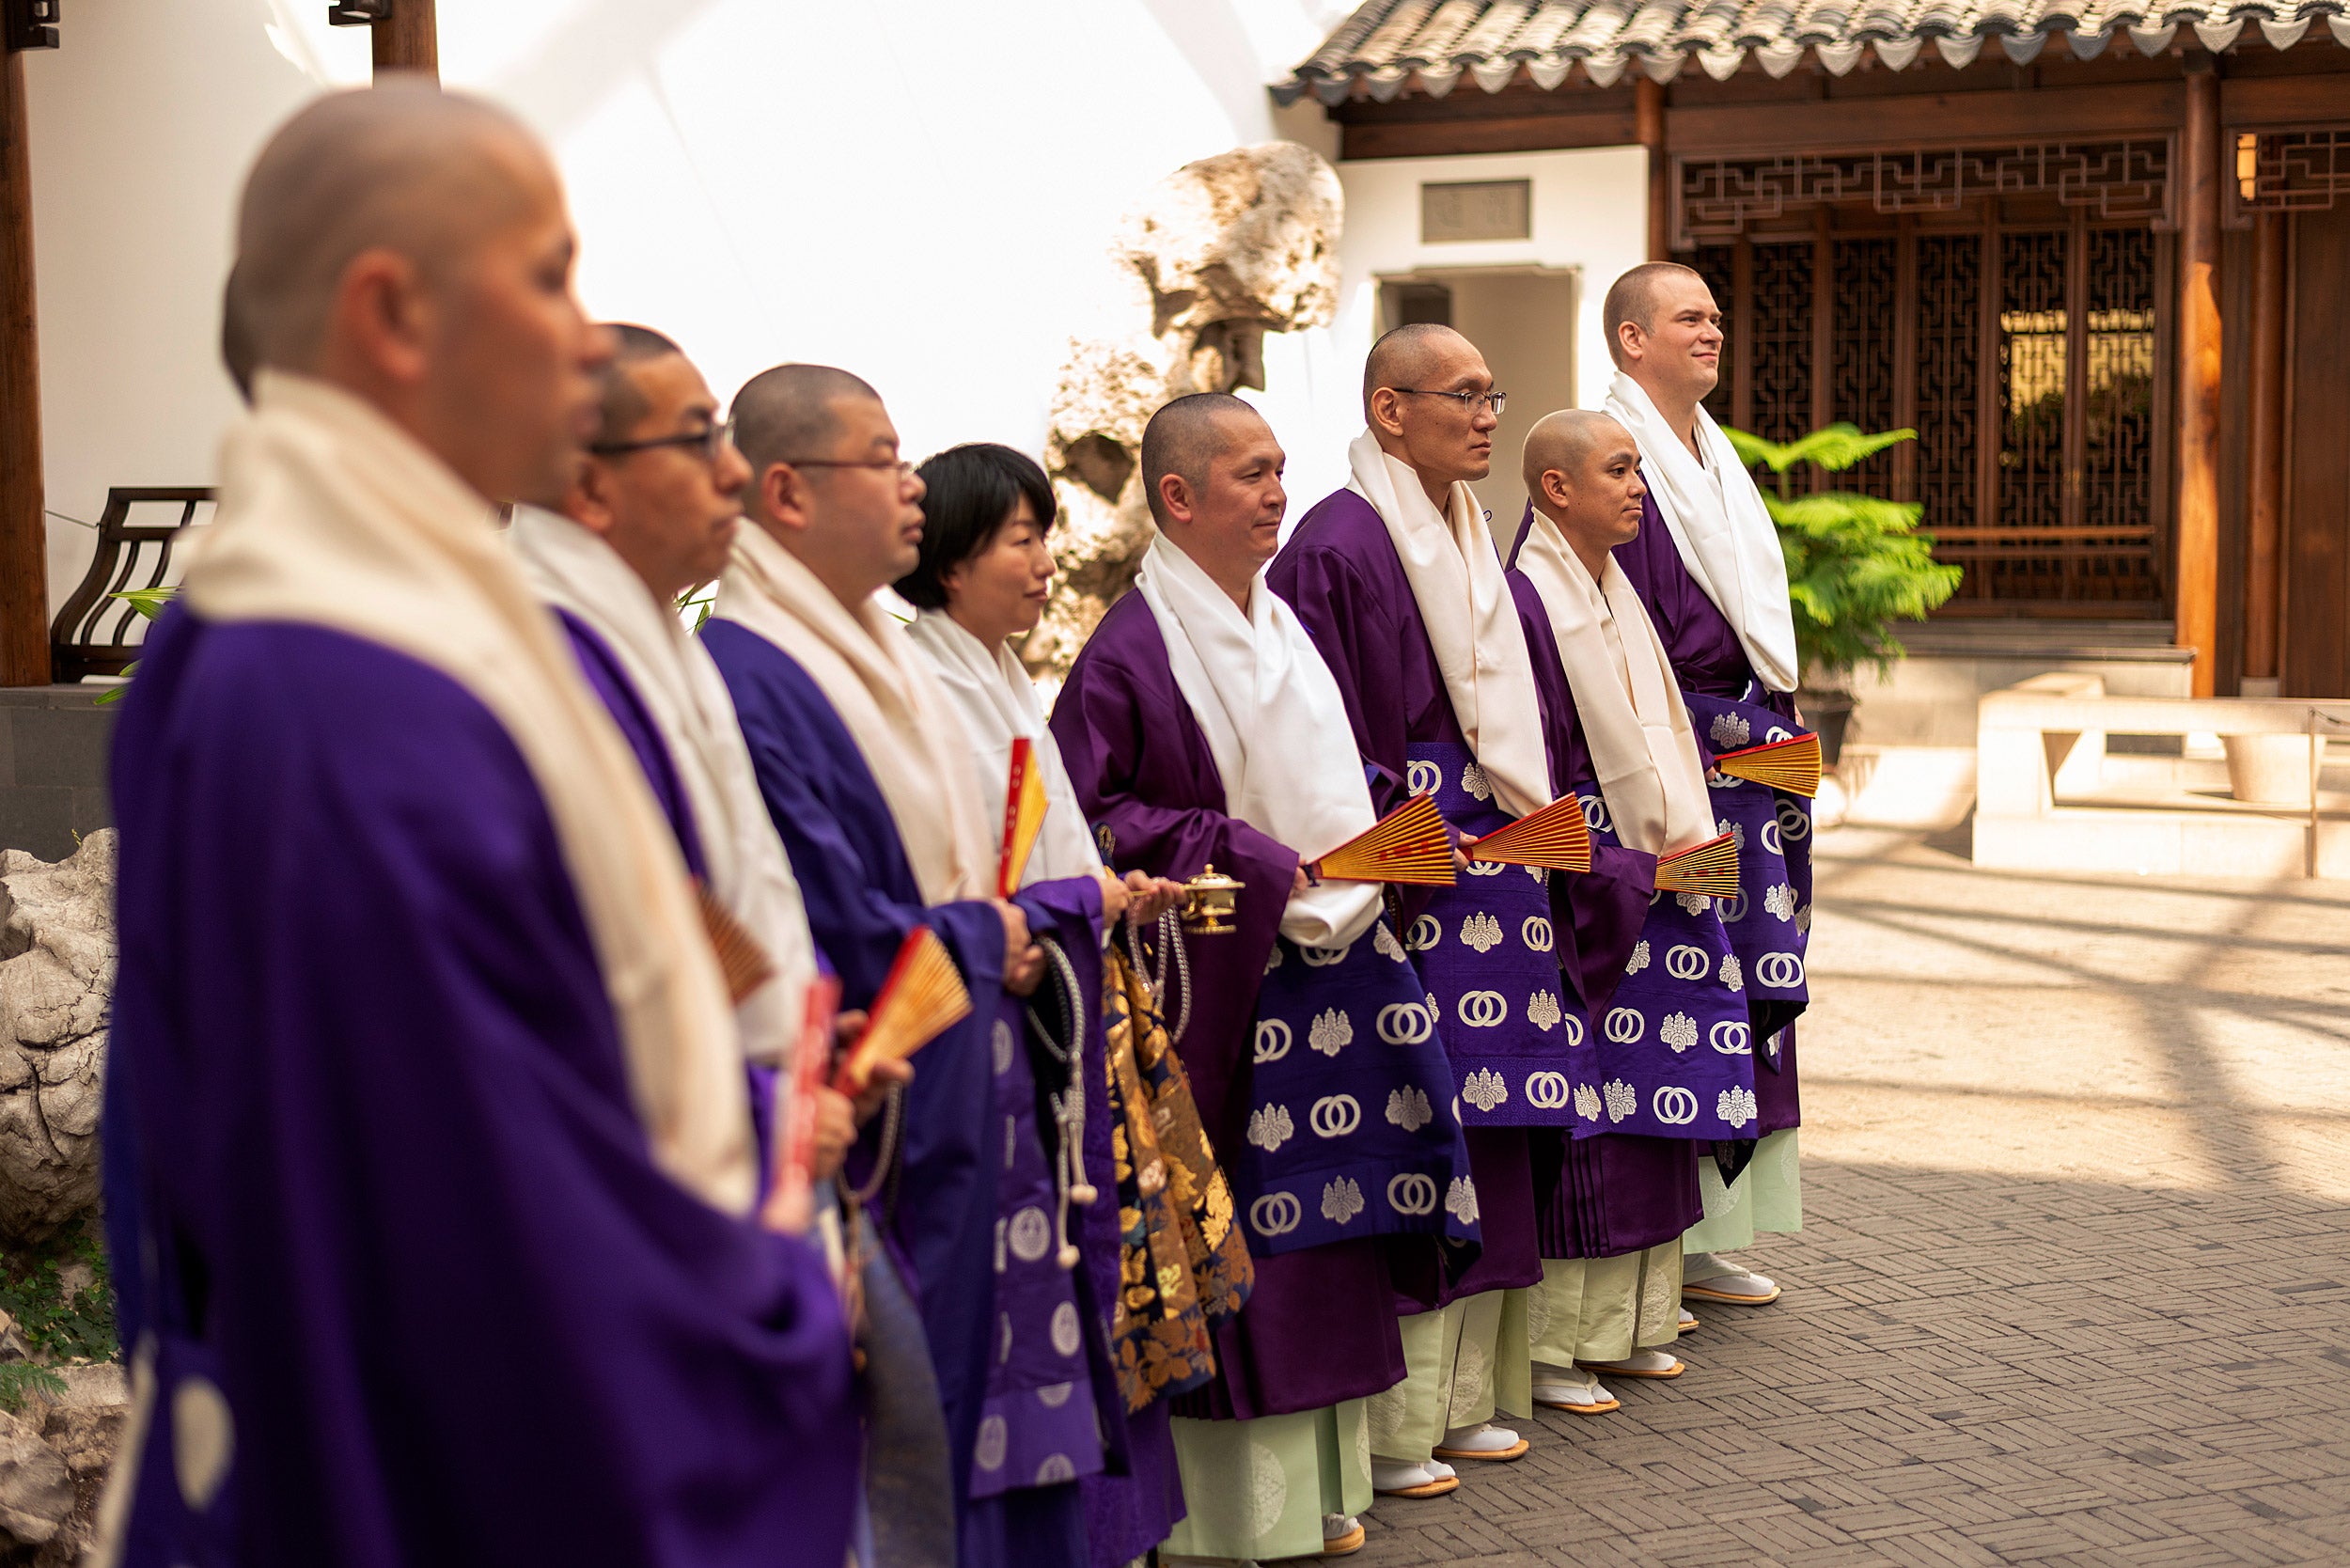 Buddhist priests stand in line during a ceremony